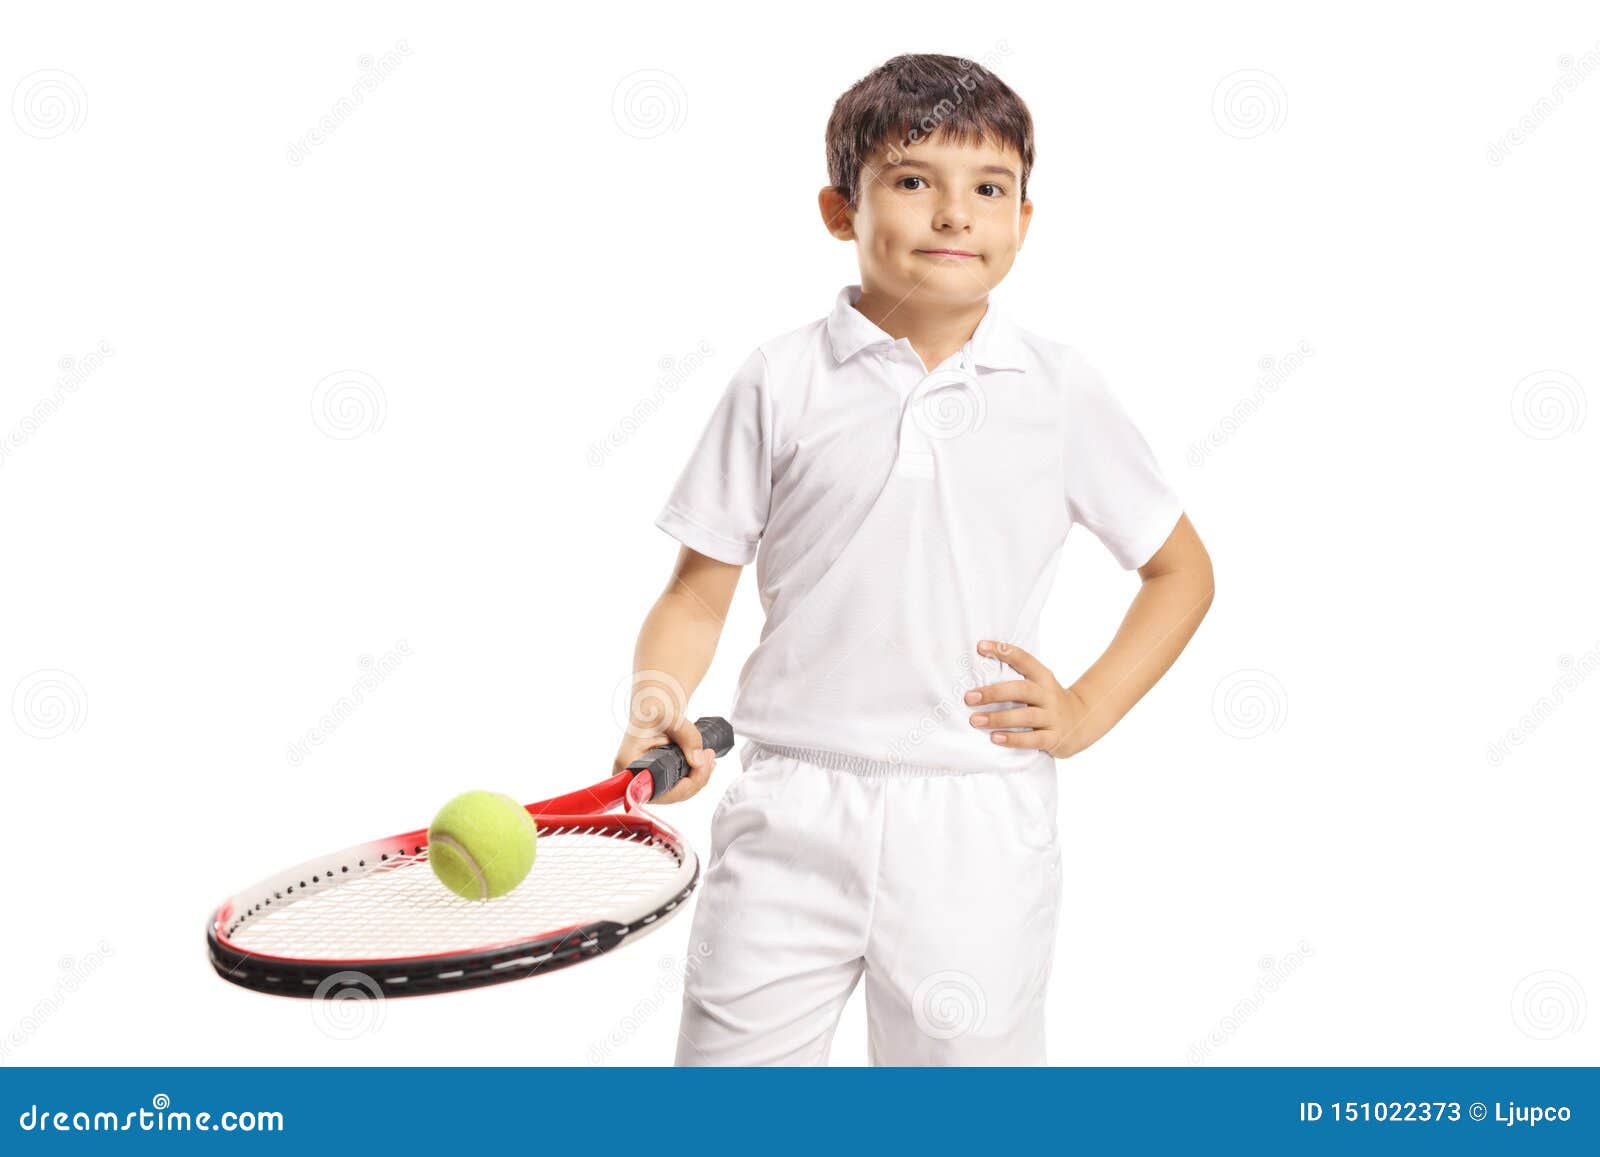 Boy Holding A Tennis Ball On A Racquet Stock Image Image Of Play Childhood